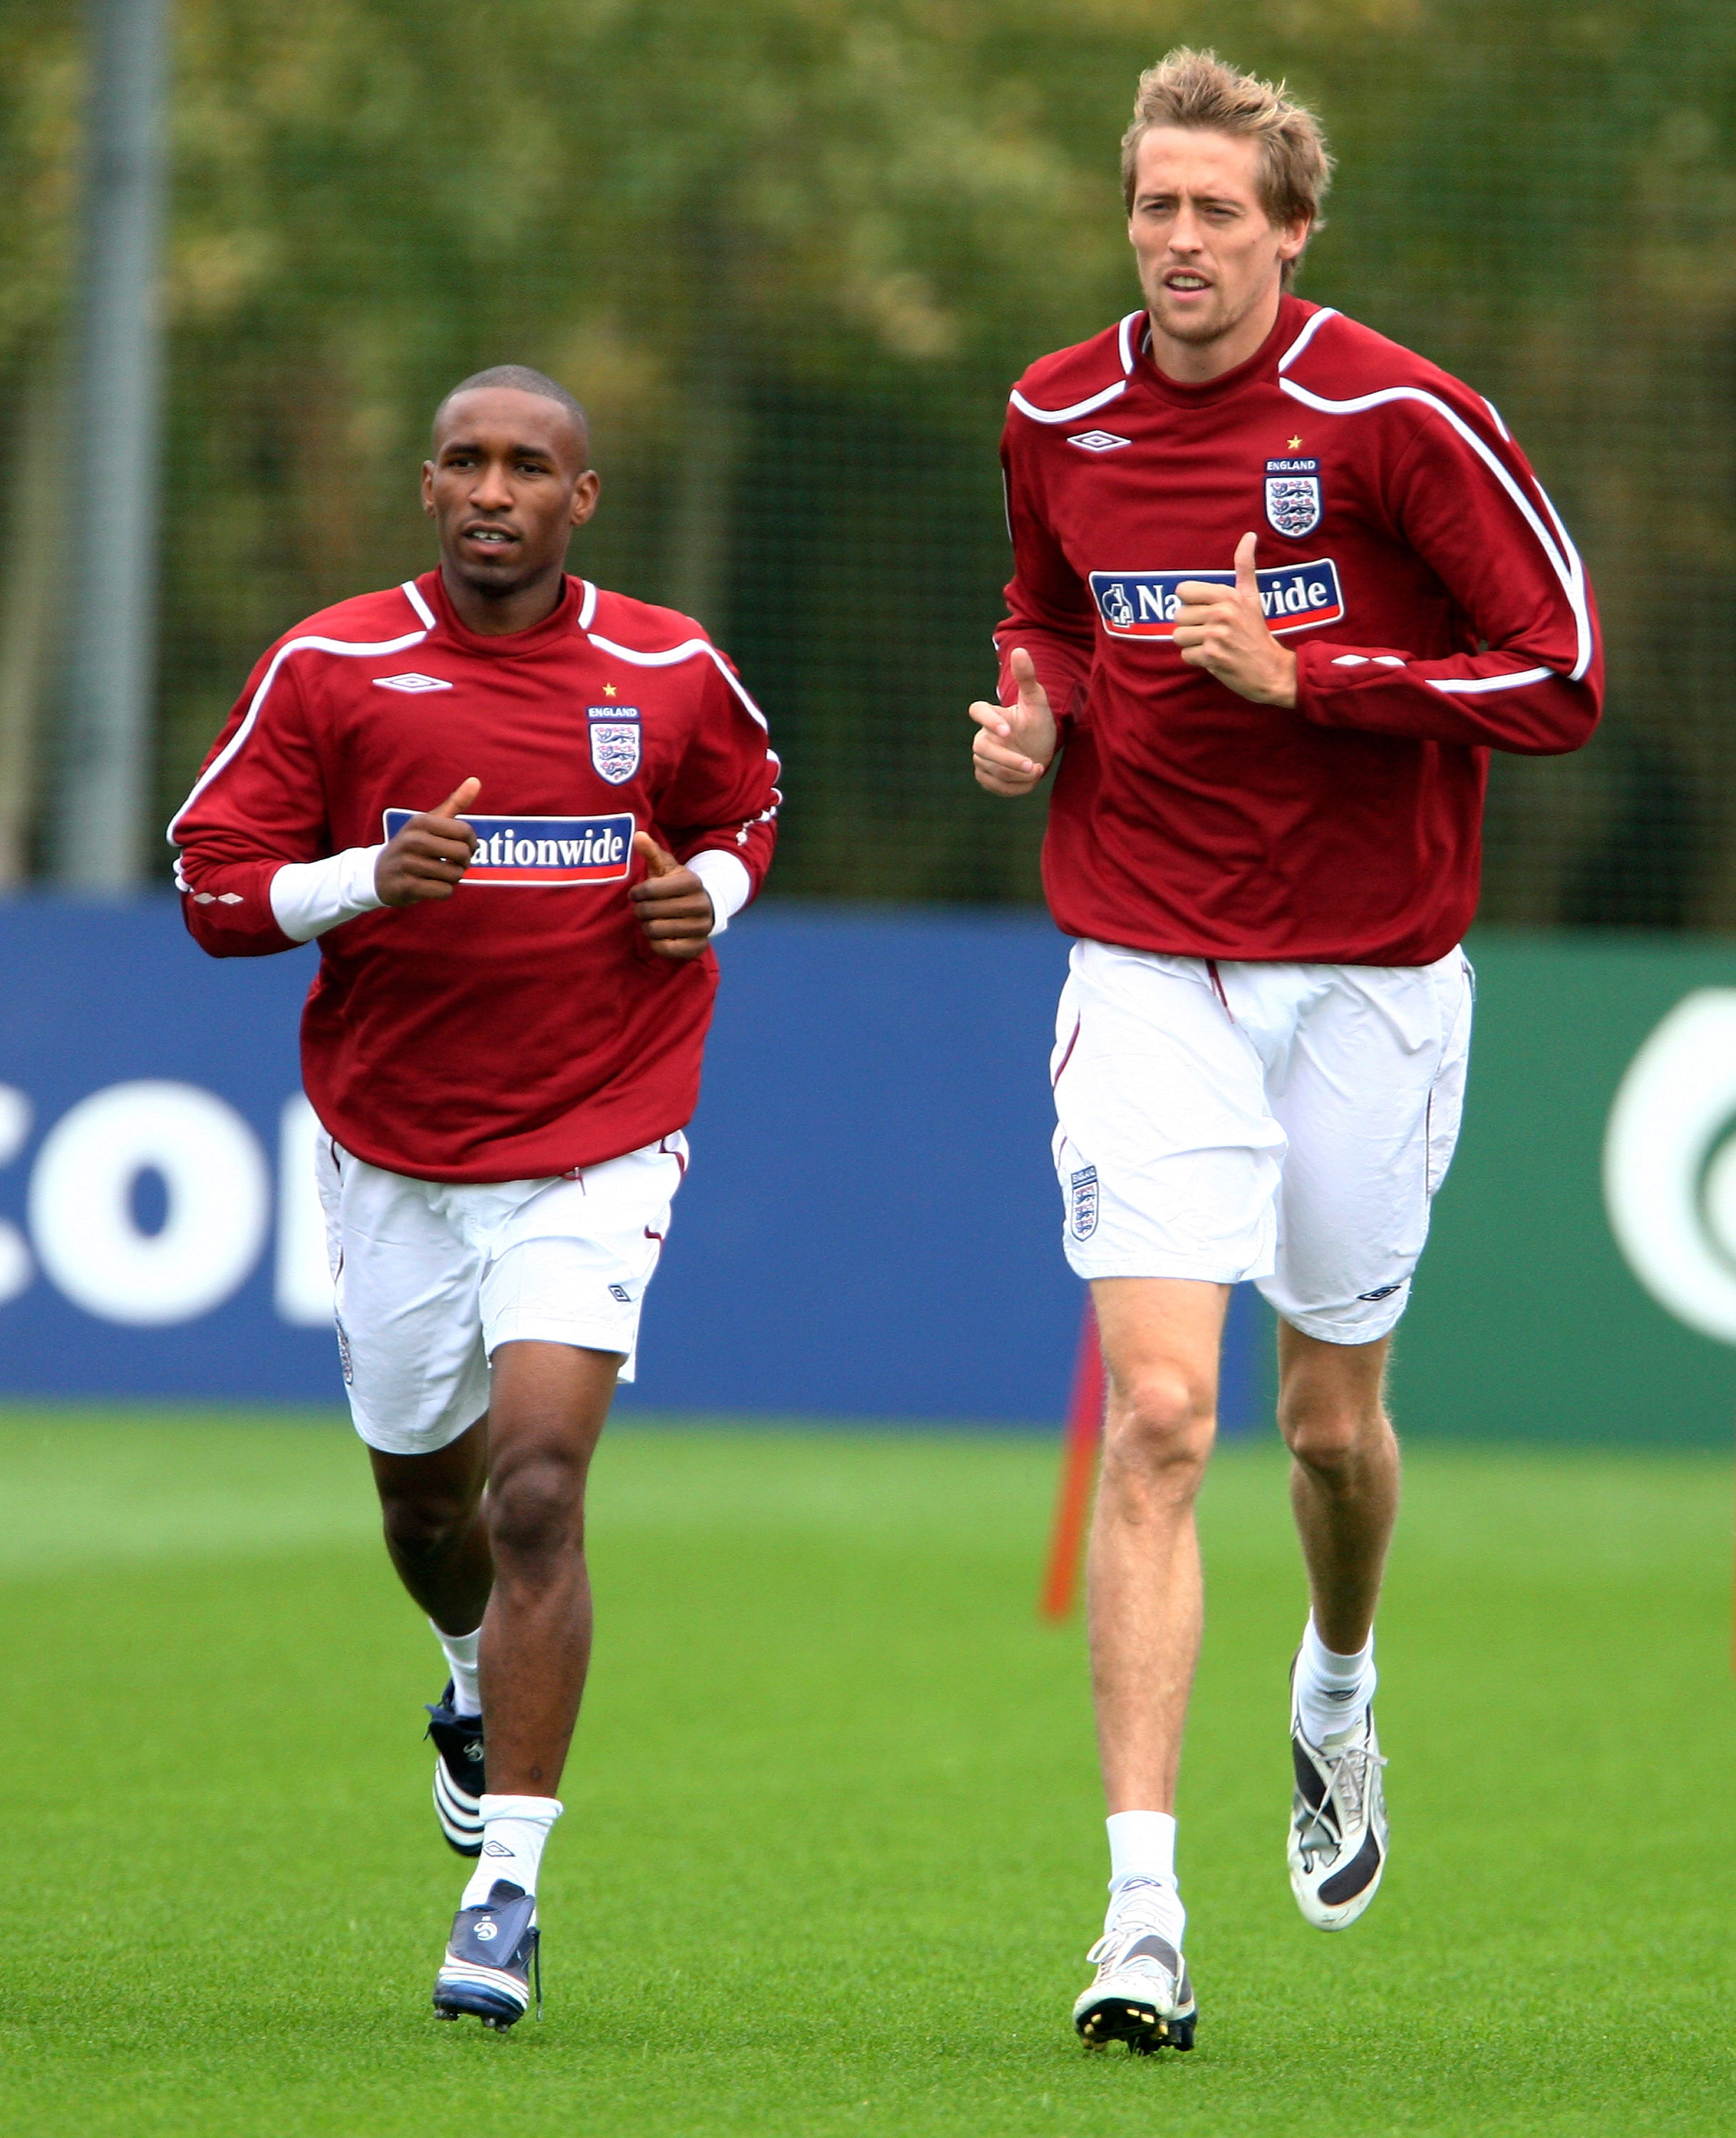 LONDON COLNEY, UNITED KINGDOM - OCTOBER 07:  Jermain Defoe and Peter Crouch of England during the England training session at London Colney on October 7, 2008 in London, England.  (Photo by Phil Cole/Getty Images)